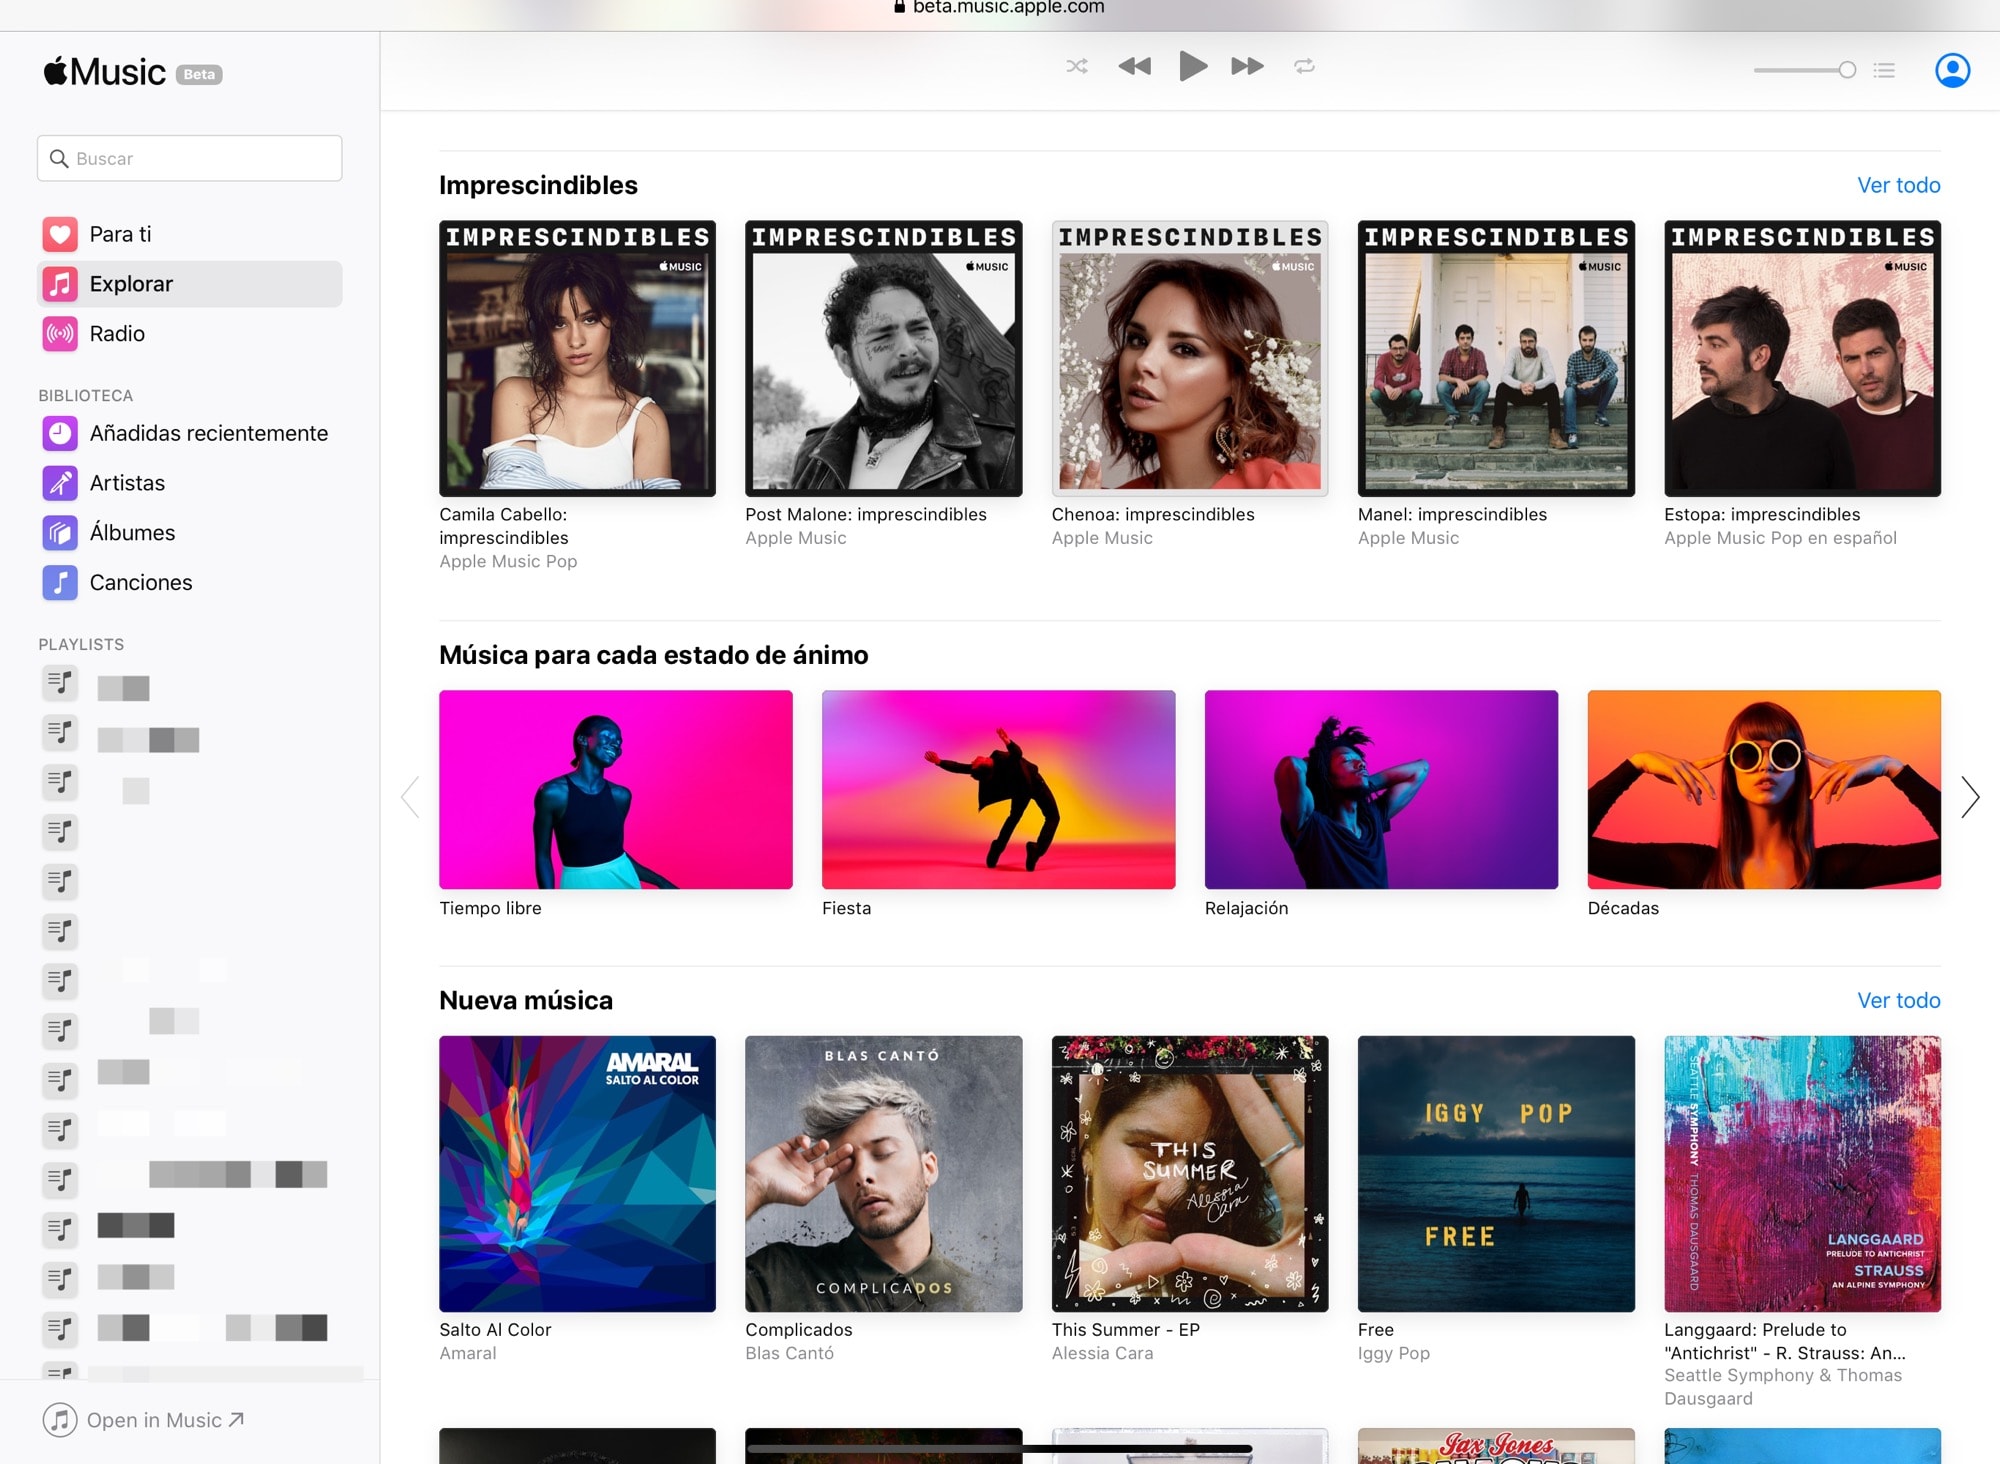 Apple Music is now available in any web browser.